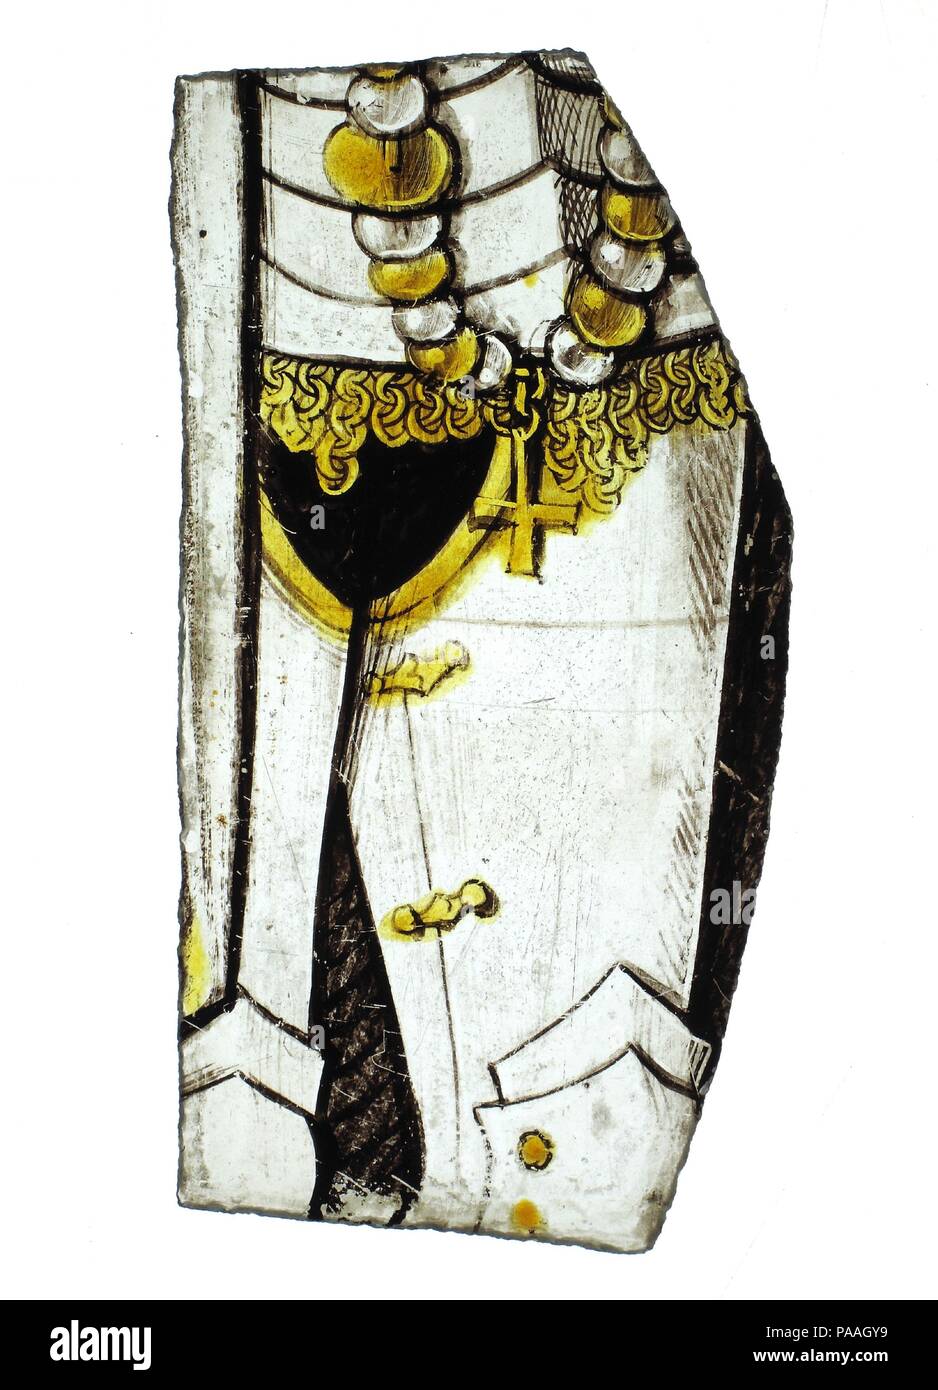 Glass Fragment. Culture: South Netherlandish. Dimensions: Overall: 7 1/4 x 3 3/4 in. (18.5 x 9.5 cm). Date: early 16th century. Museum: Metropolitan Museum of Art, New York, USA. Stock Photo